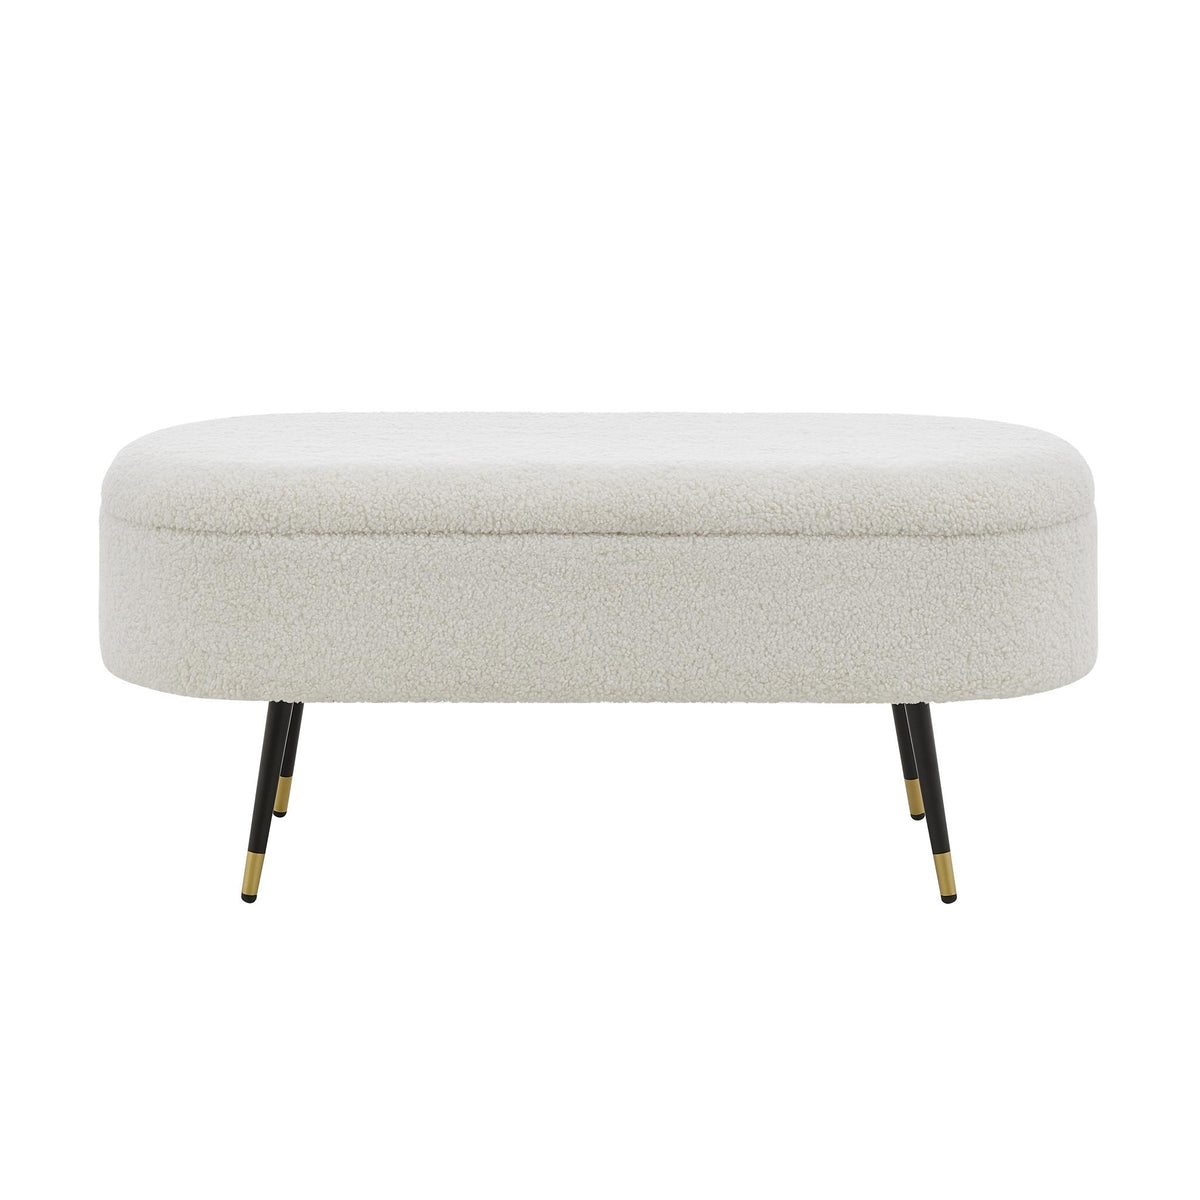 Phoebe KD Faux Shearling Fabric Storage Bench w/ Gold Tip Metal Legs by New Pacific Direct - 1600076